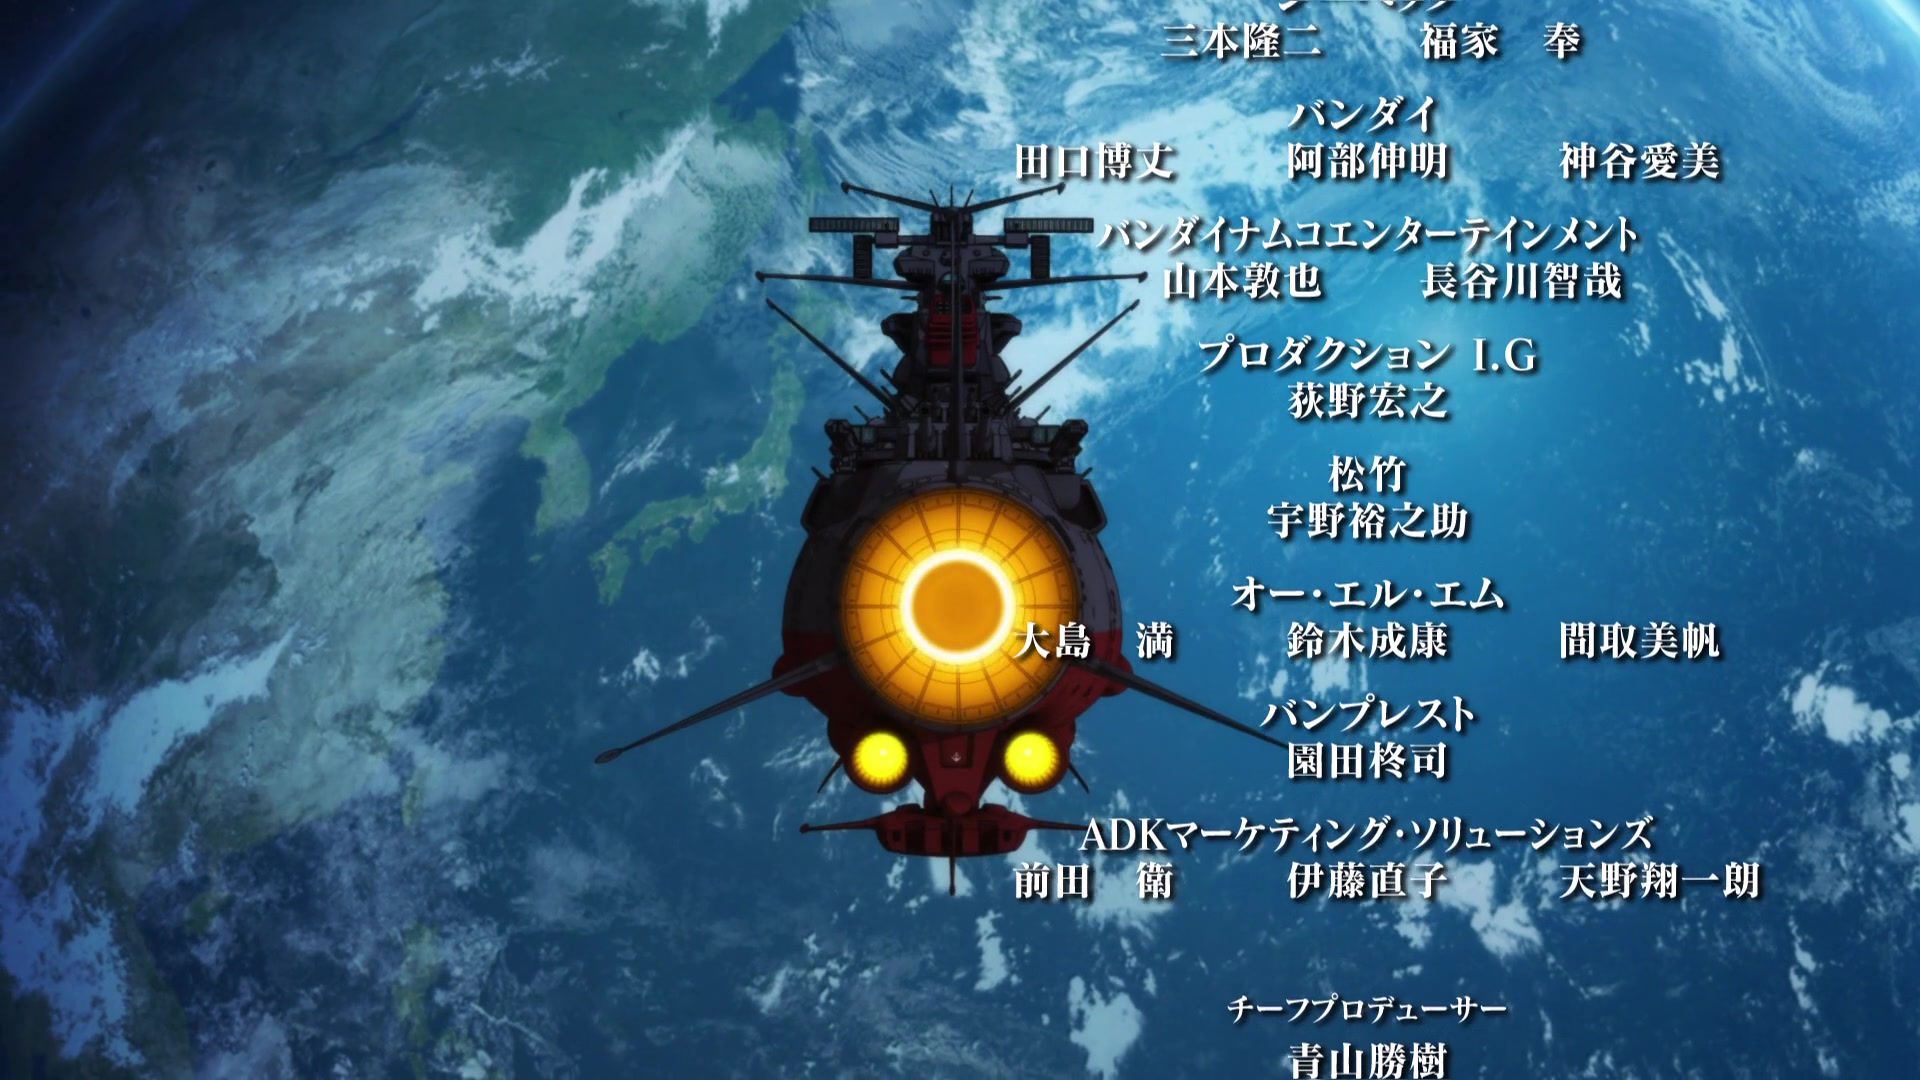 In Our Next Star Blazers Adventure The Modern Era The Tom Brevoort Experience